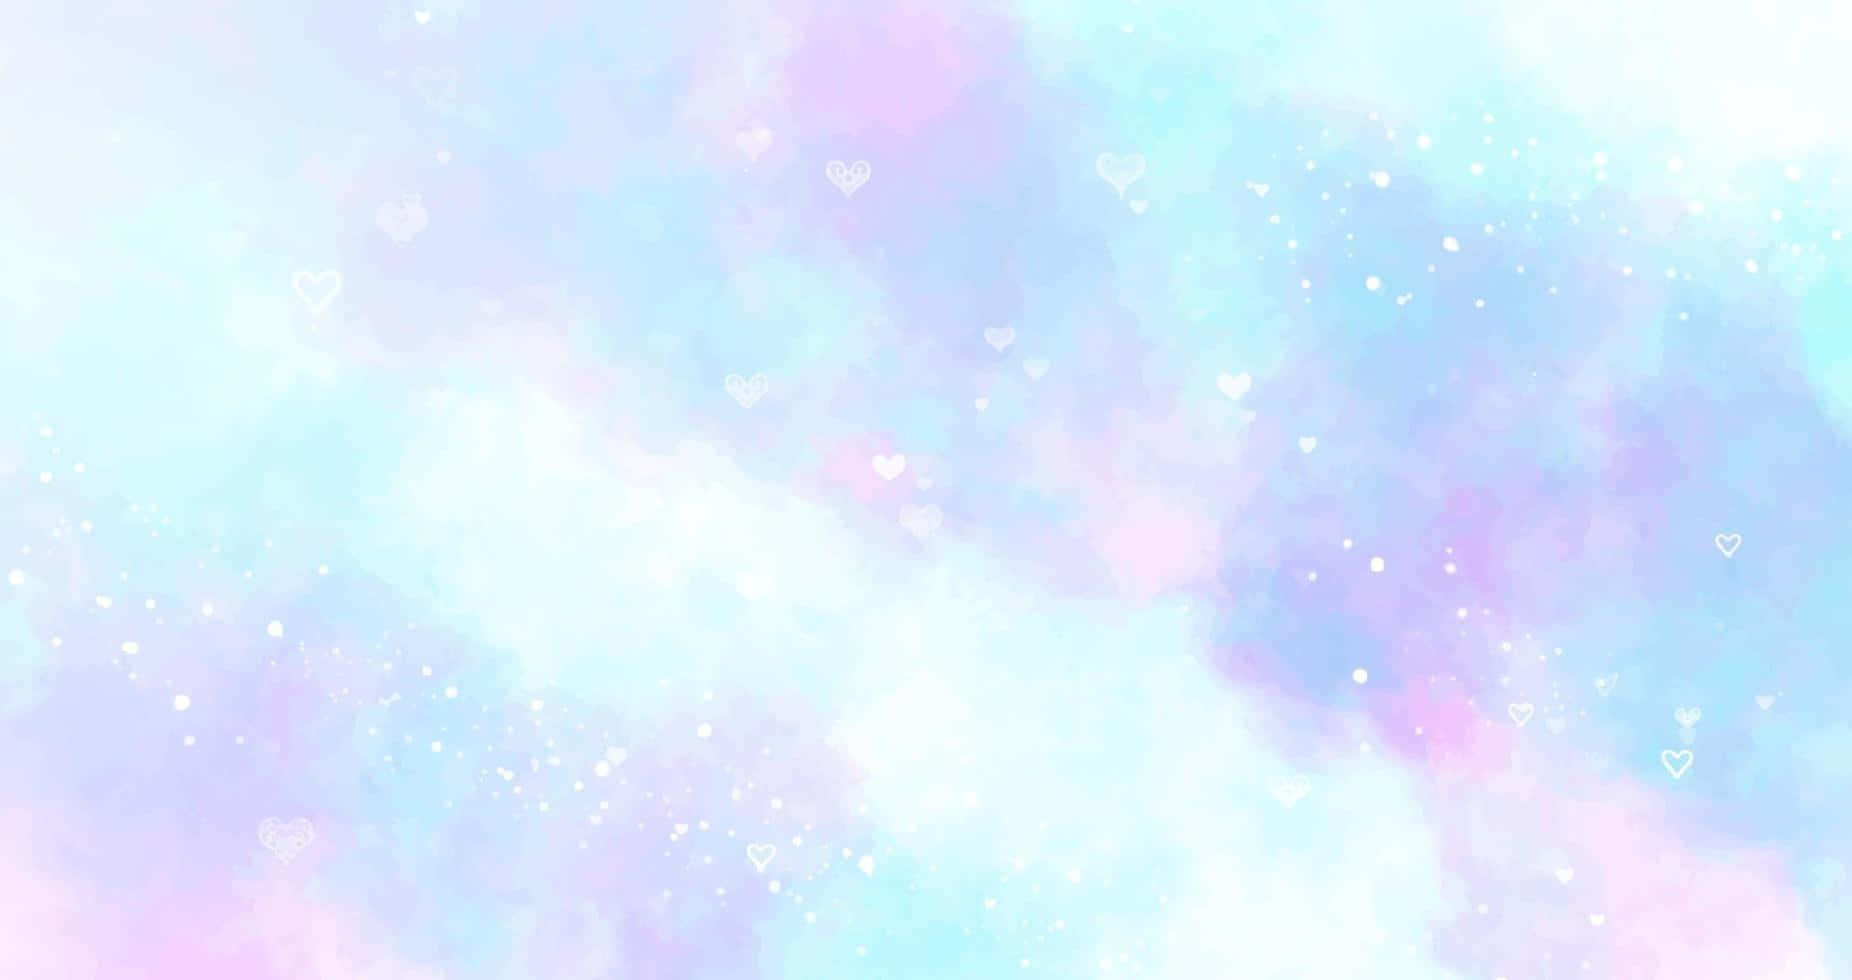 Download A Watercolor Background With Blue And Pink Stars | Wallpapers.com